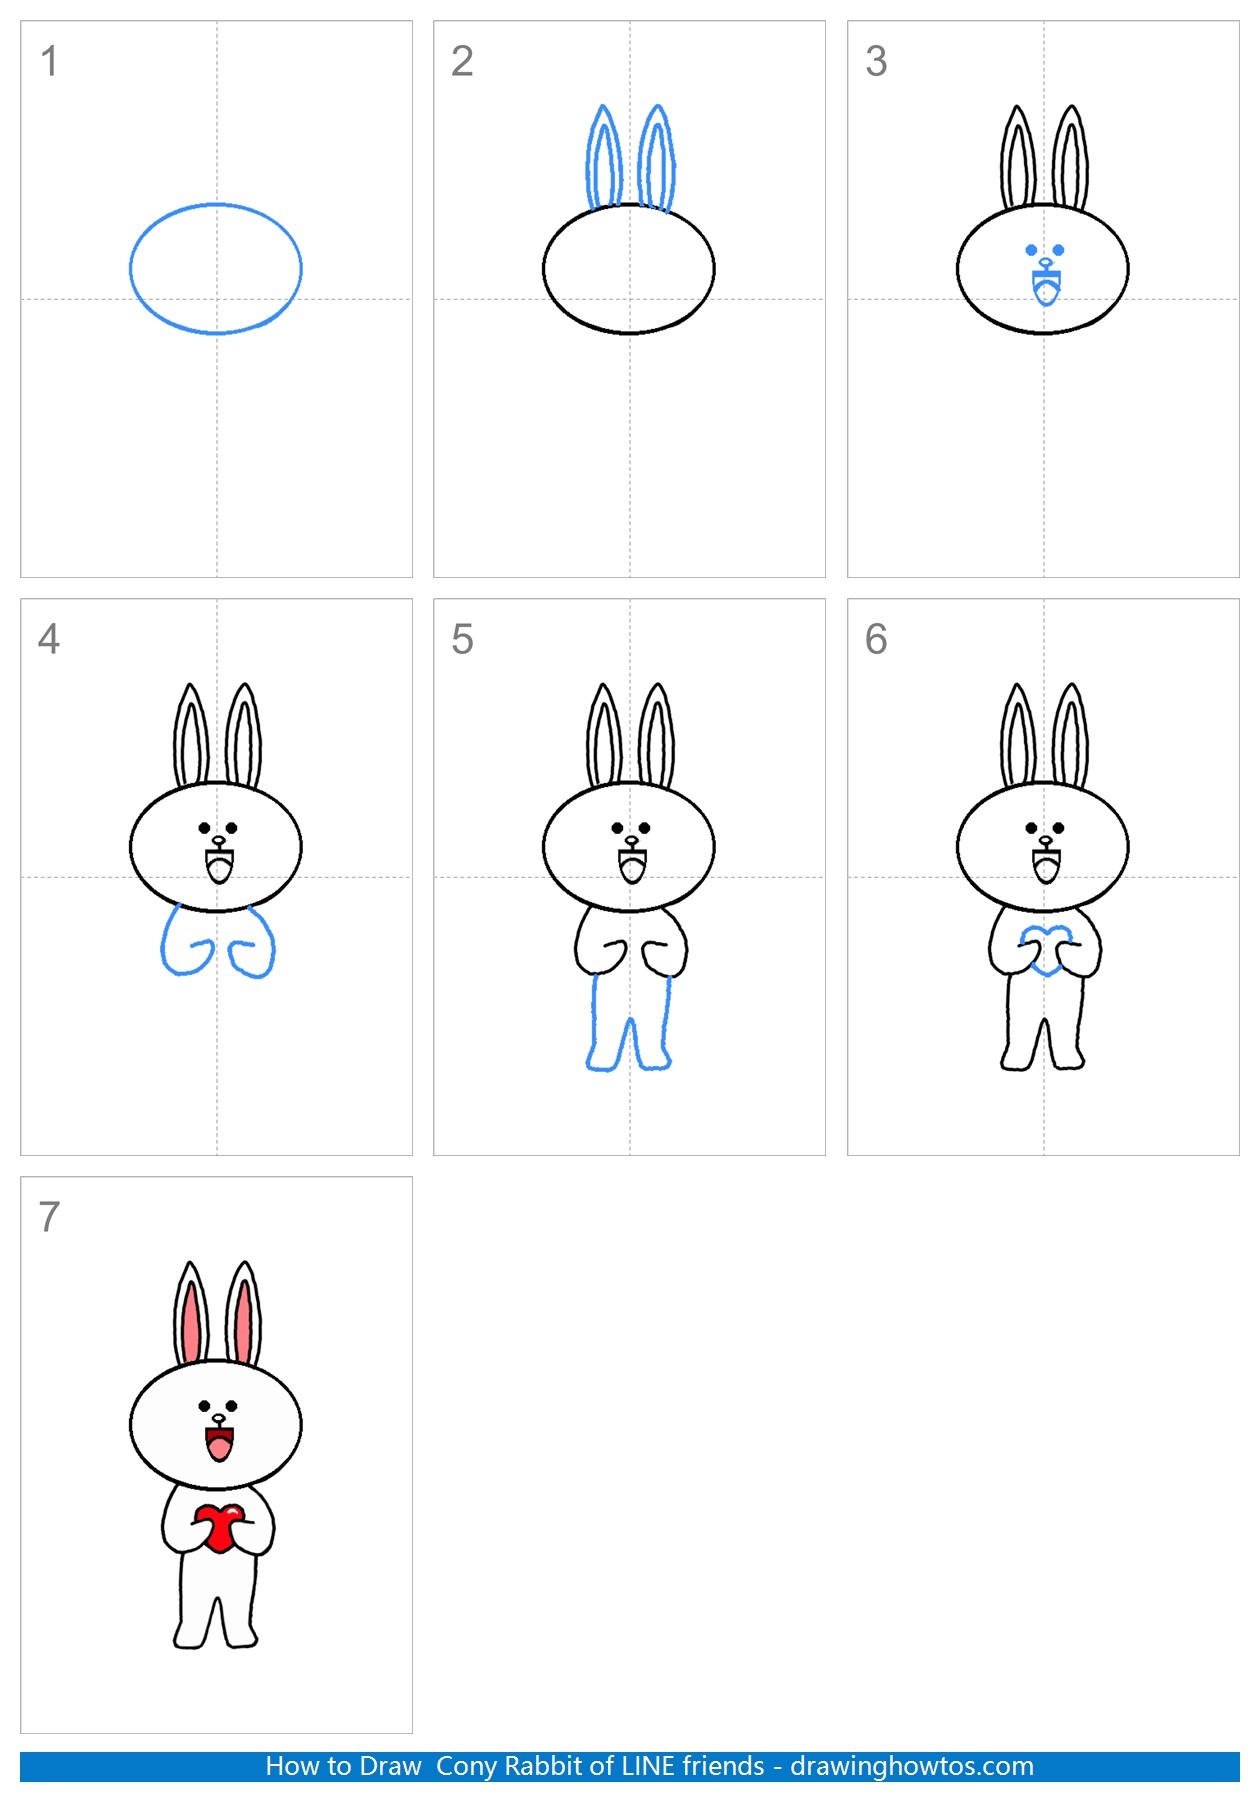 How to Draw Cony Rabbit Step by Step